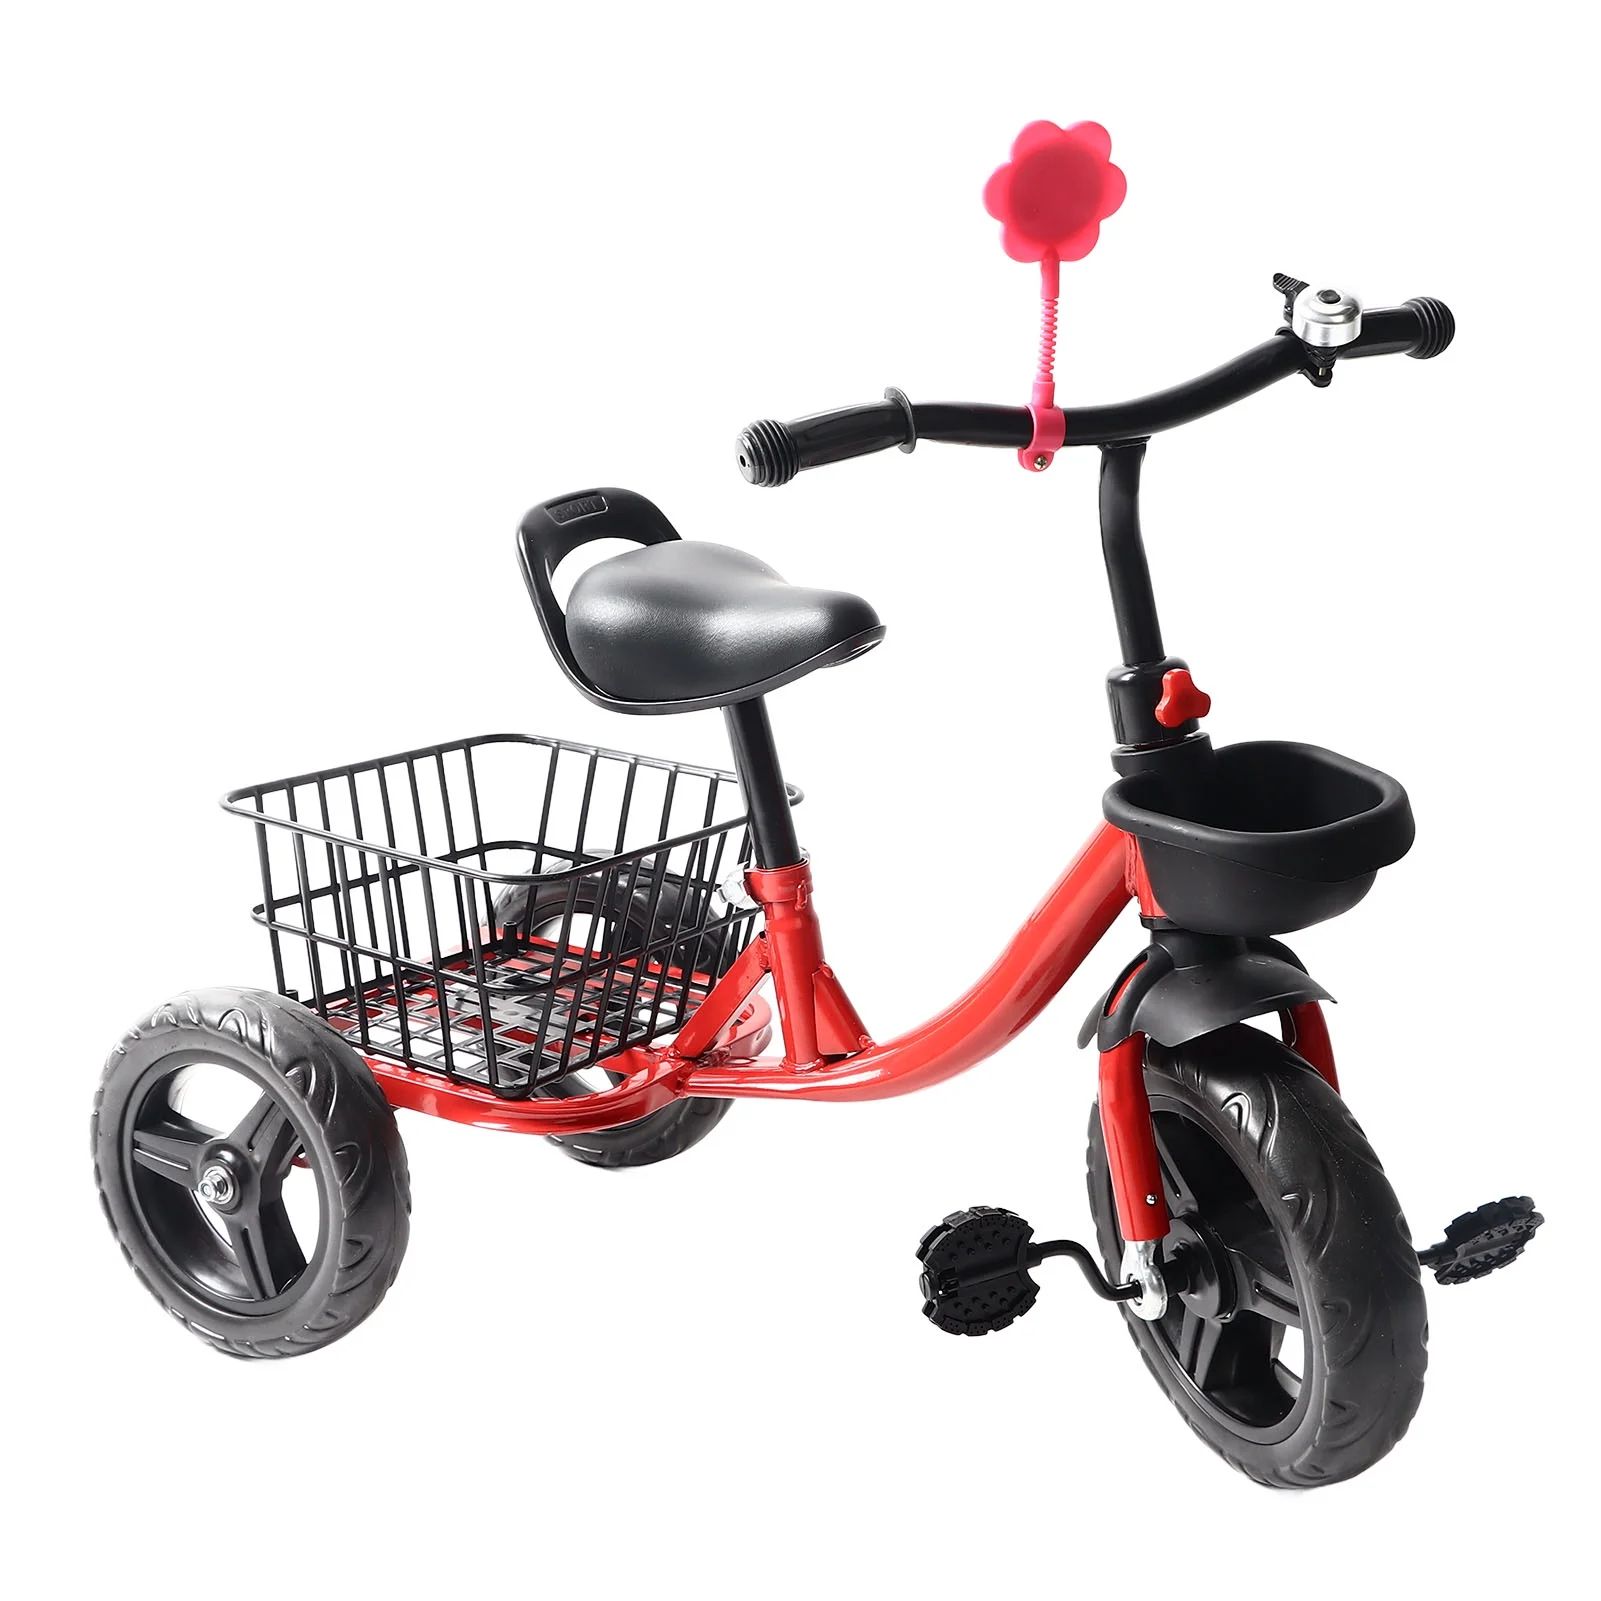 Eotvia Toddler Bike with Basket, 3 Wheel Kids Bike for 1-4 Years Old Boys Girls, Tricycles for To... | Walmart (US)